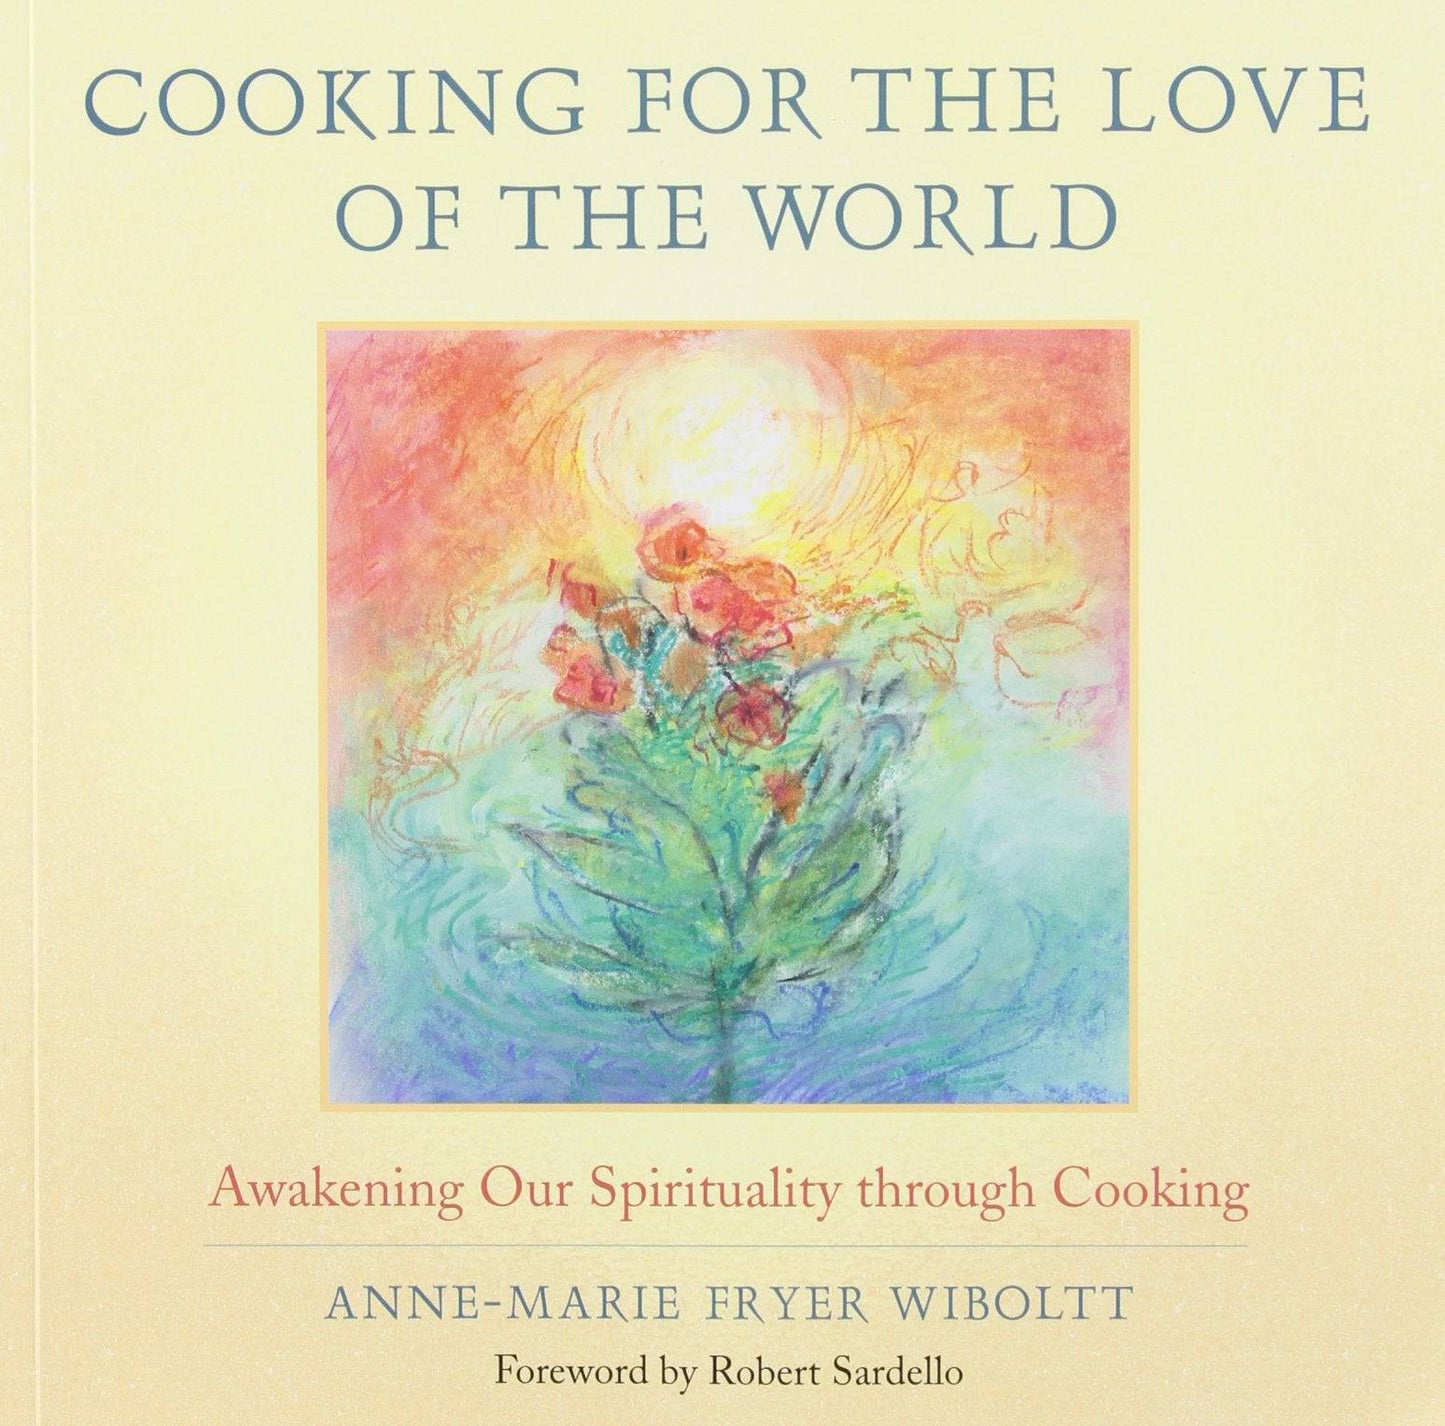 Cooking for the Love of the World: Awakening Our Spirituality through Cooking by Anne-Marie Fryer Wiboltt, Introduction by Robert Sardello - The Josephine Porter Institute